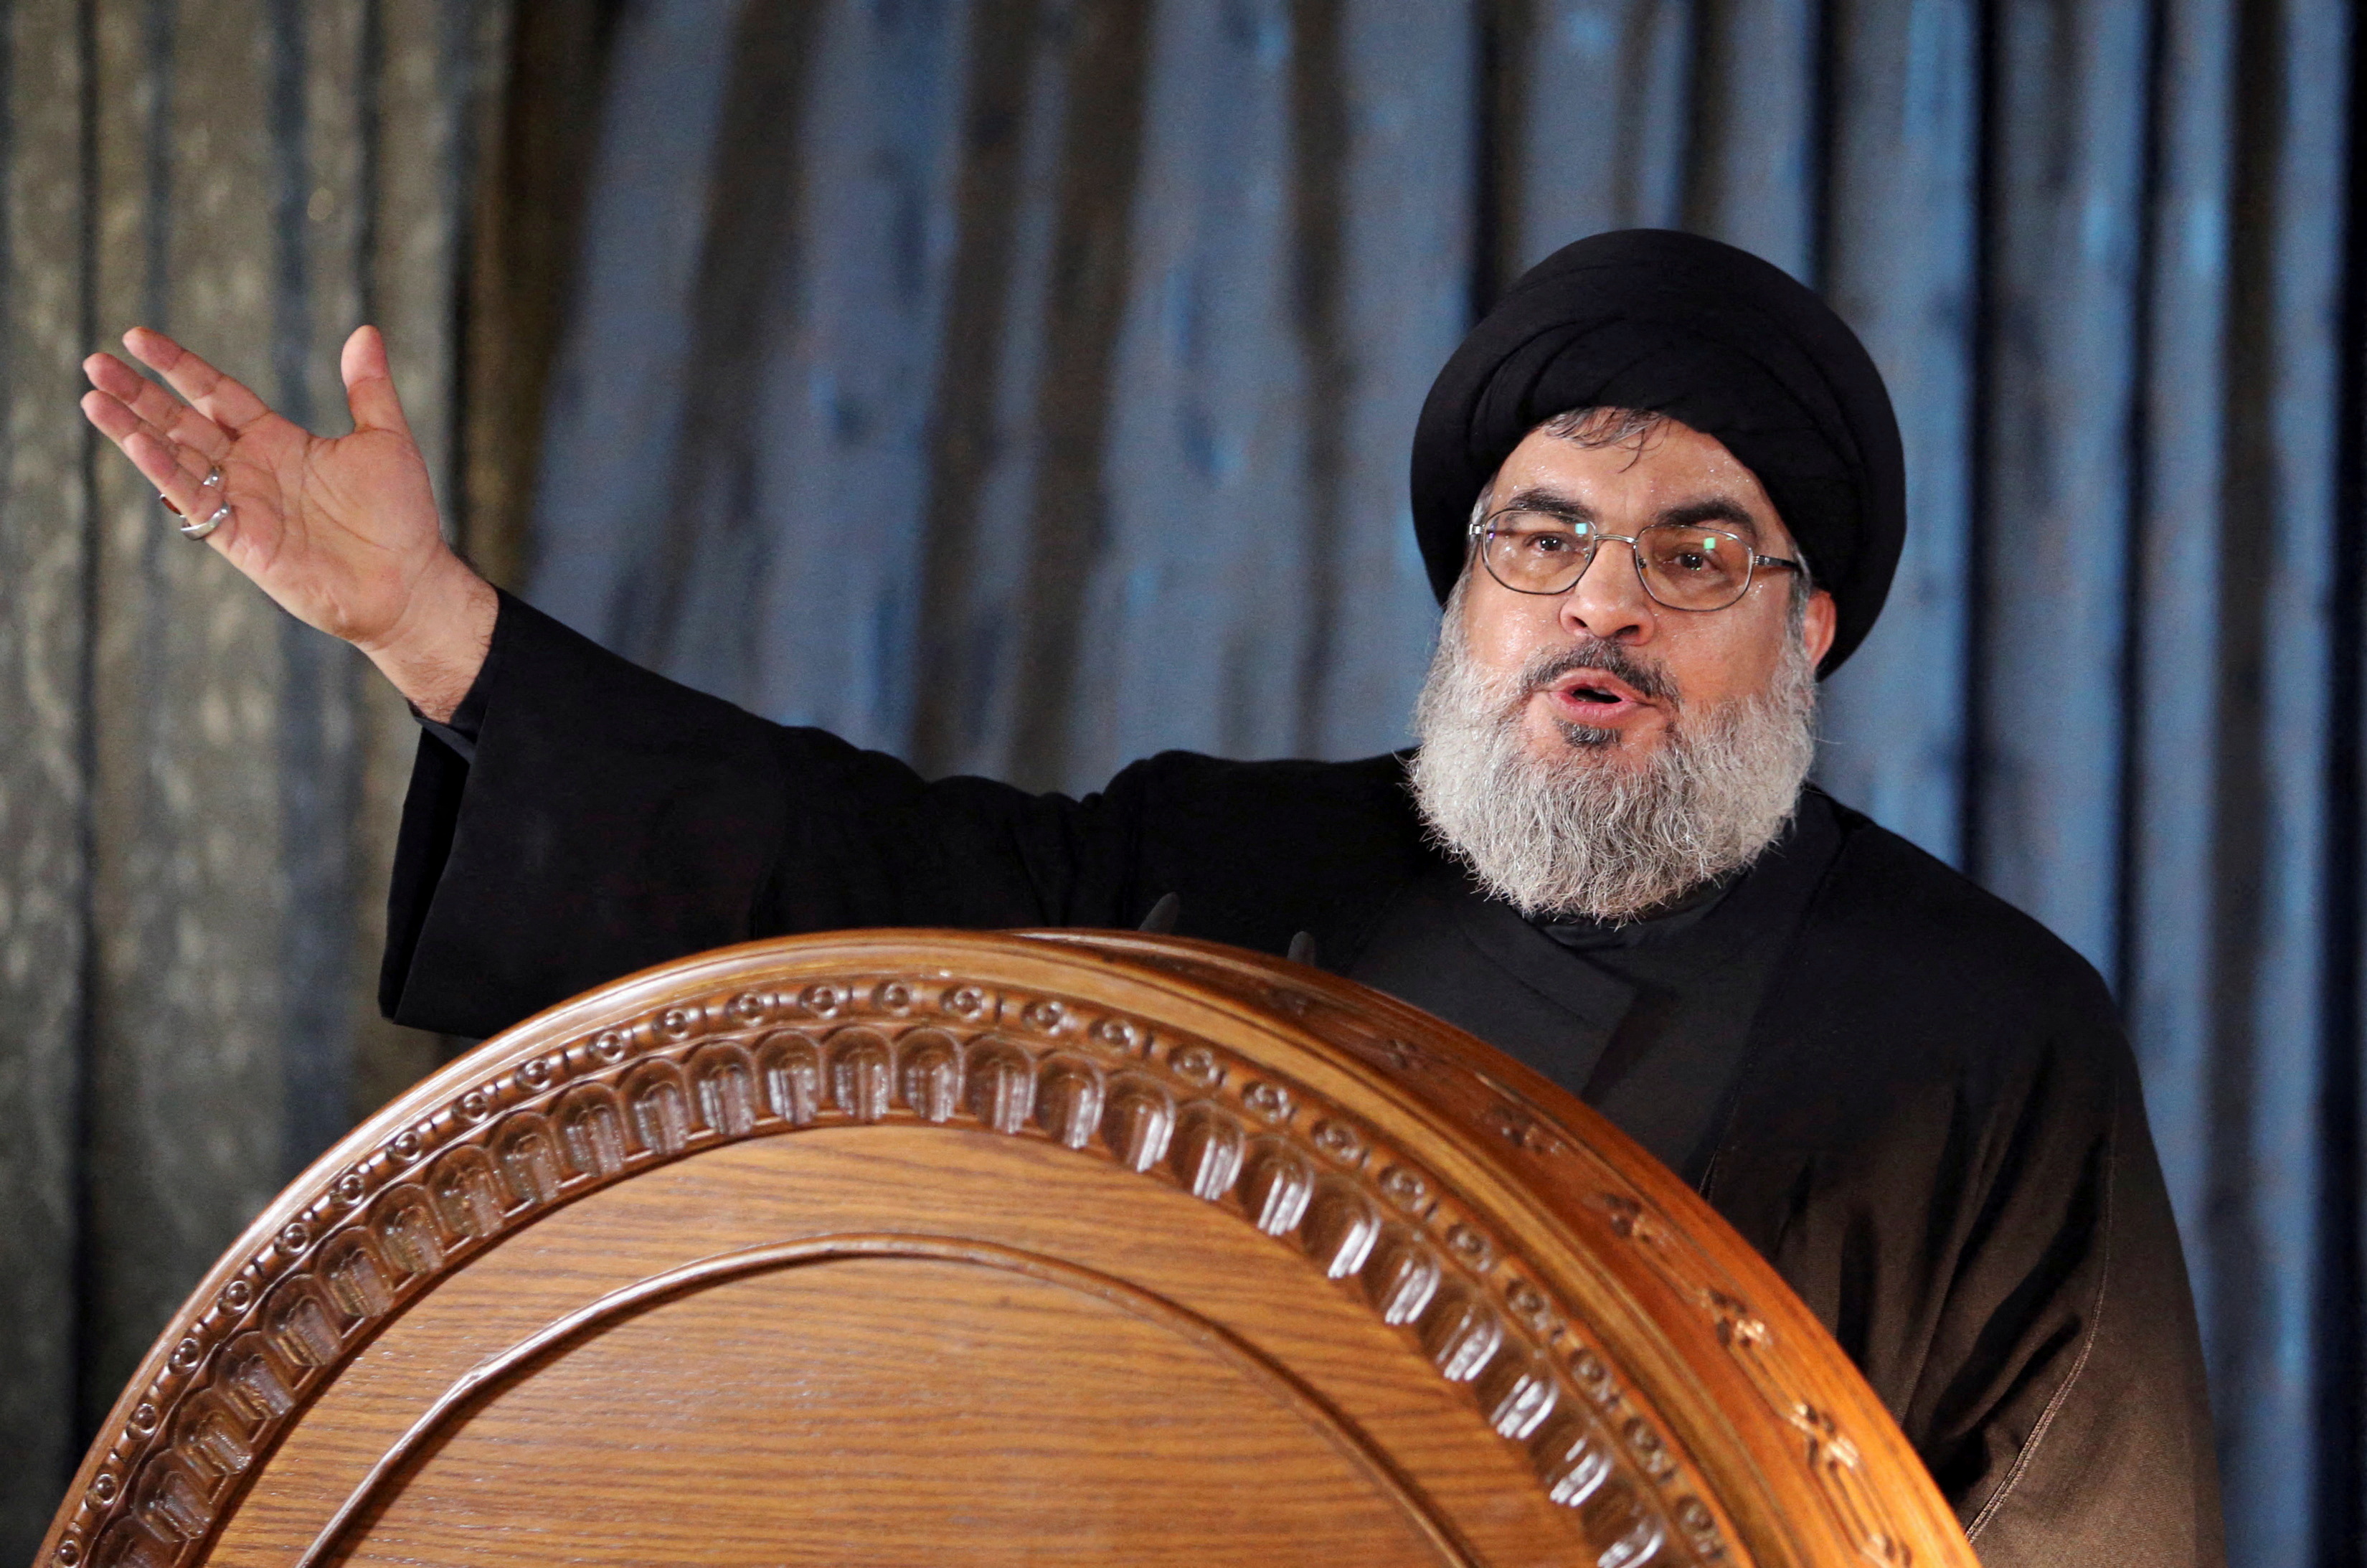 Lebanon's Hezbollah leader Hassan Nasrallah addresses supporters during a religious ceremony in Beirut